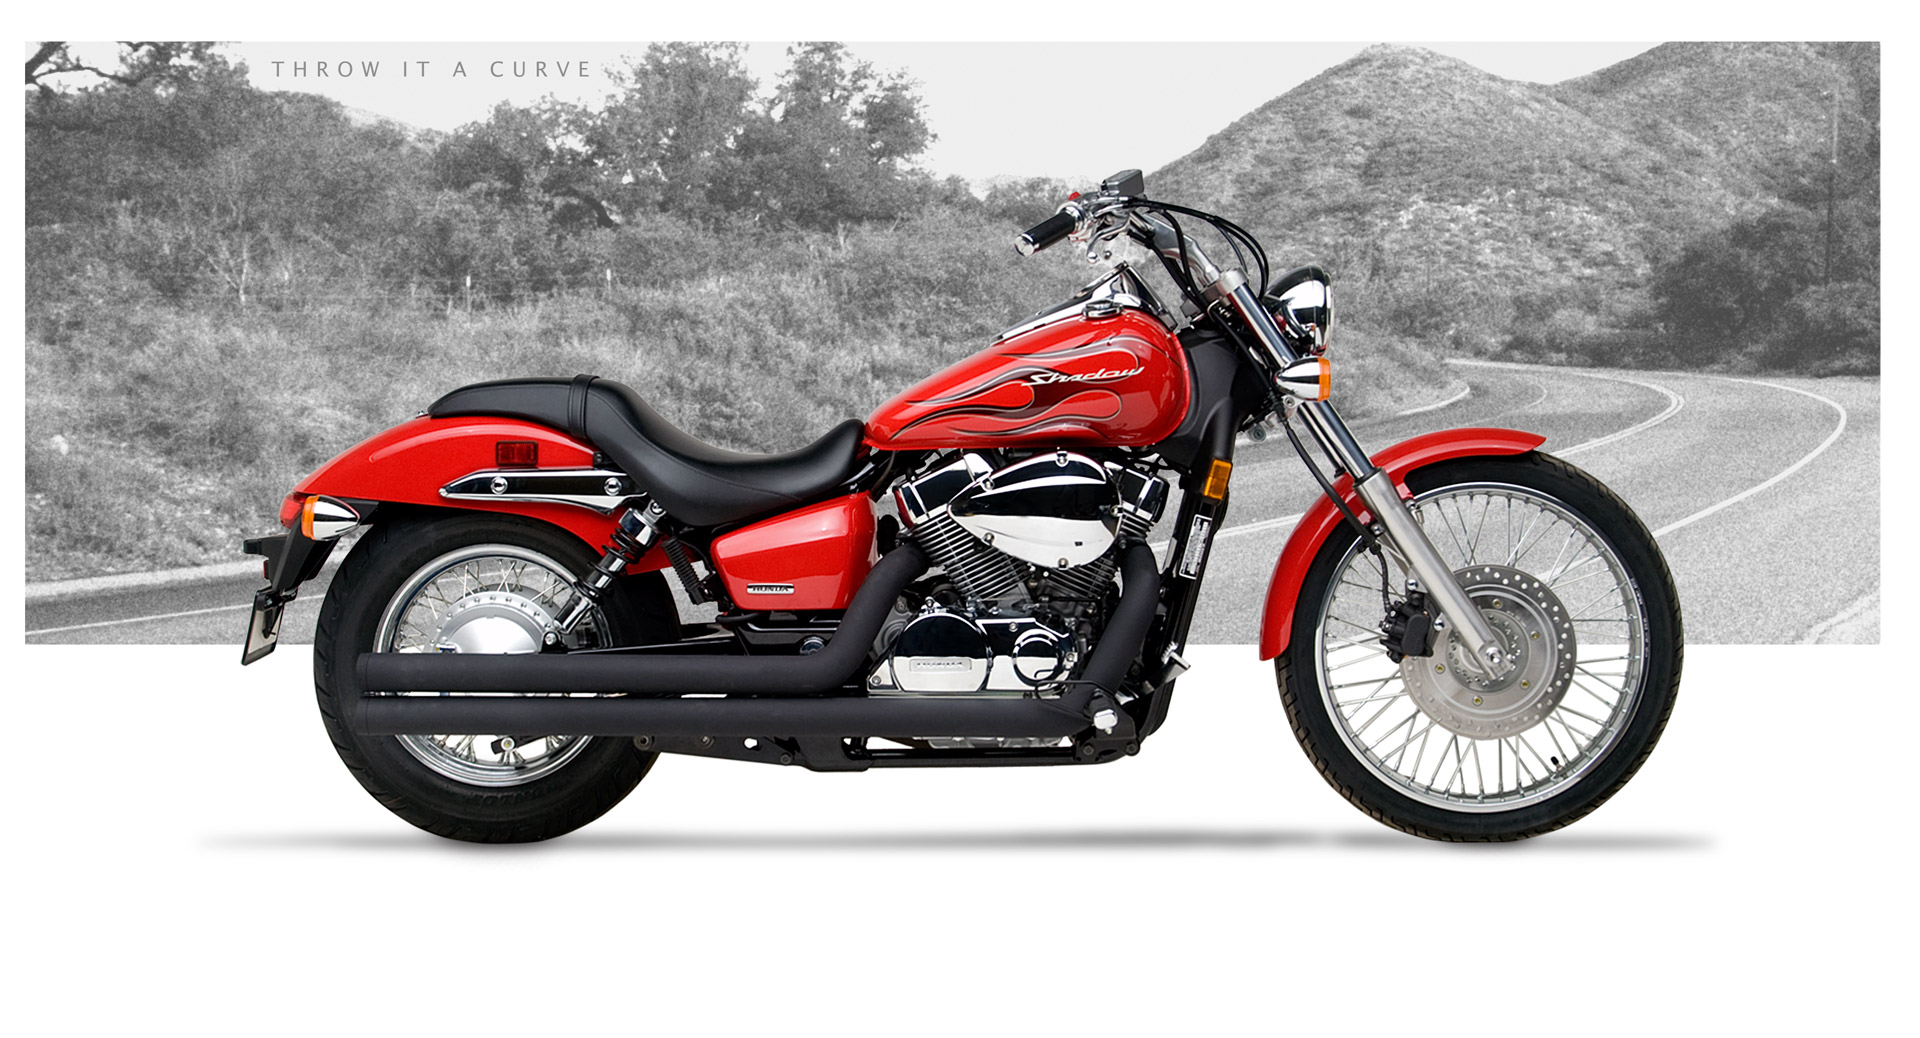 2022 honda shadow phantom 750 review: specs, features, changes explained | vt750 bobber motorcycle